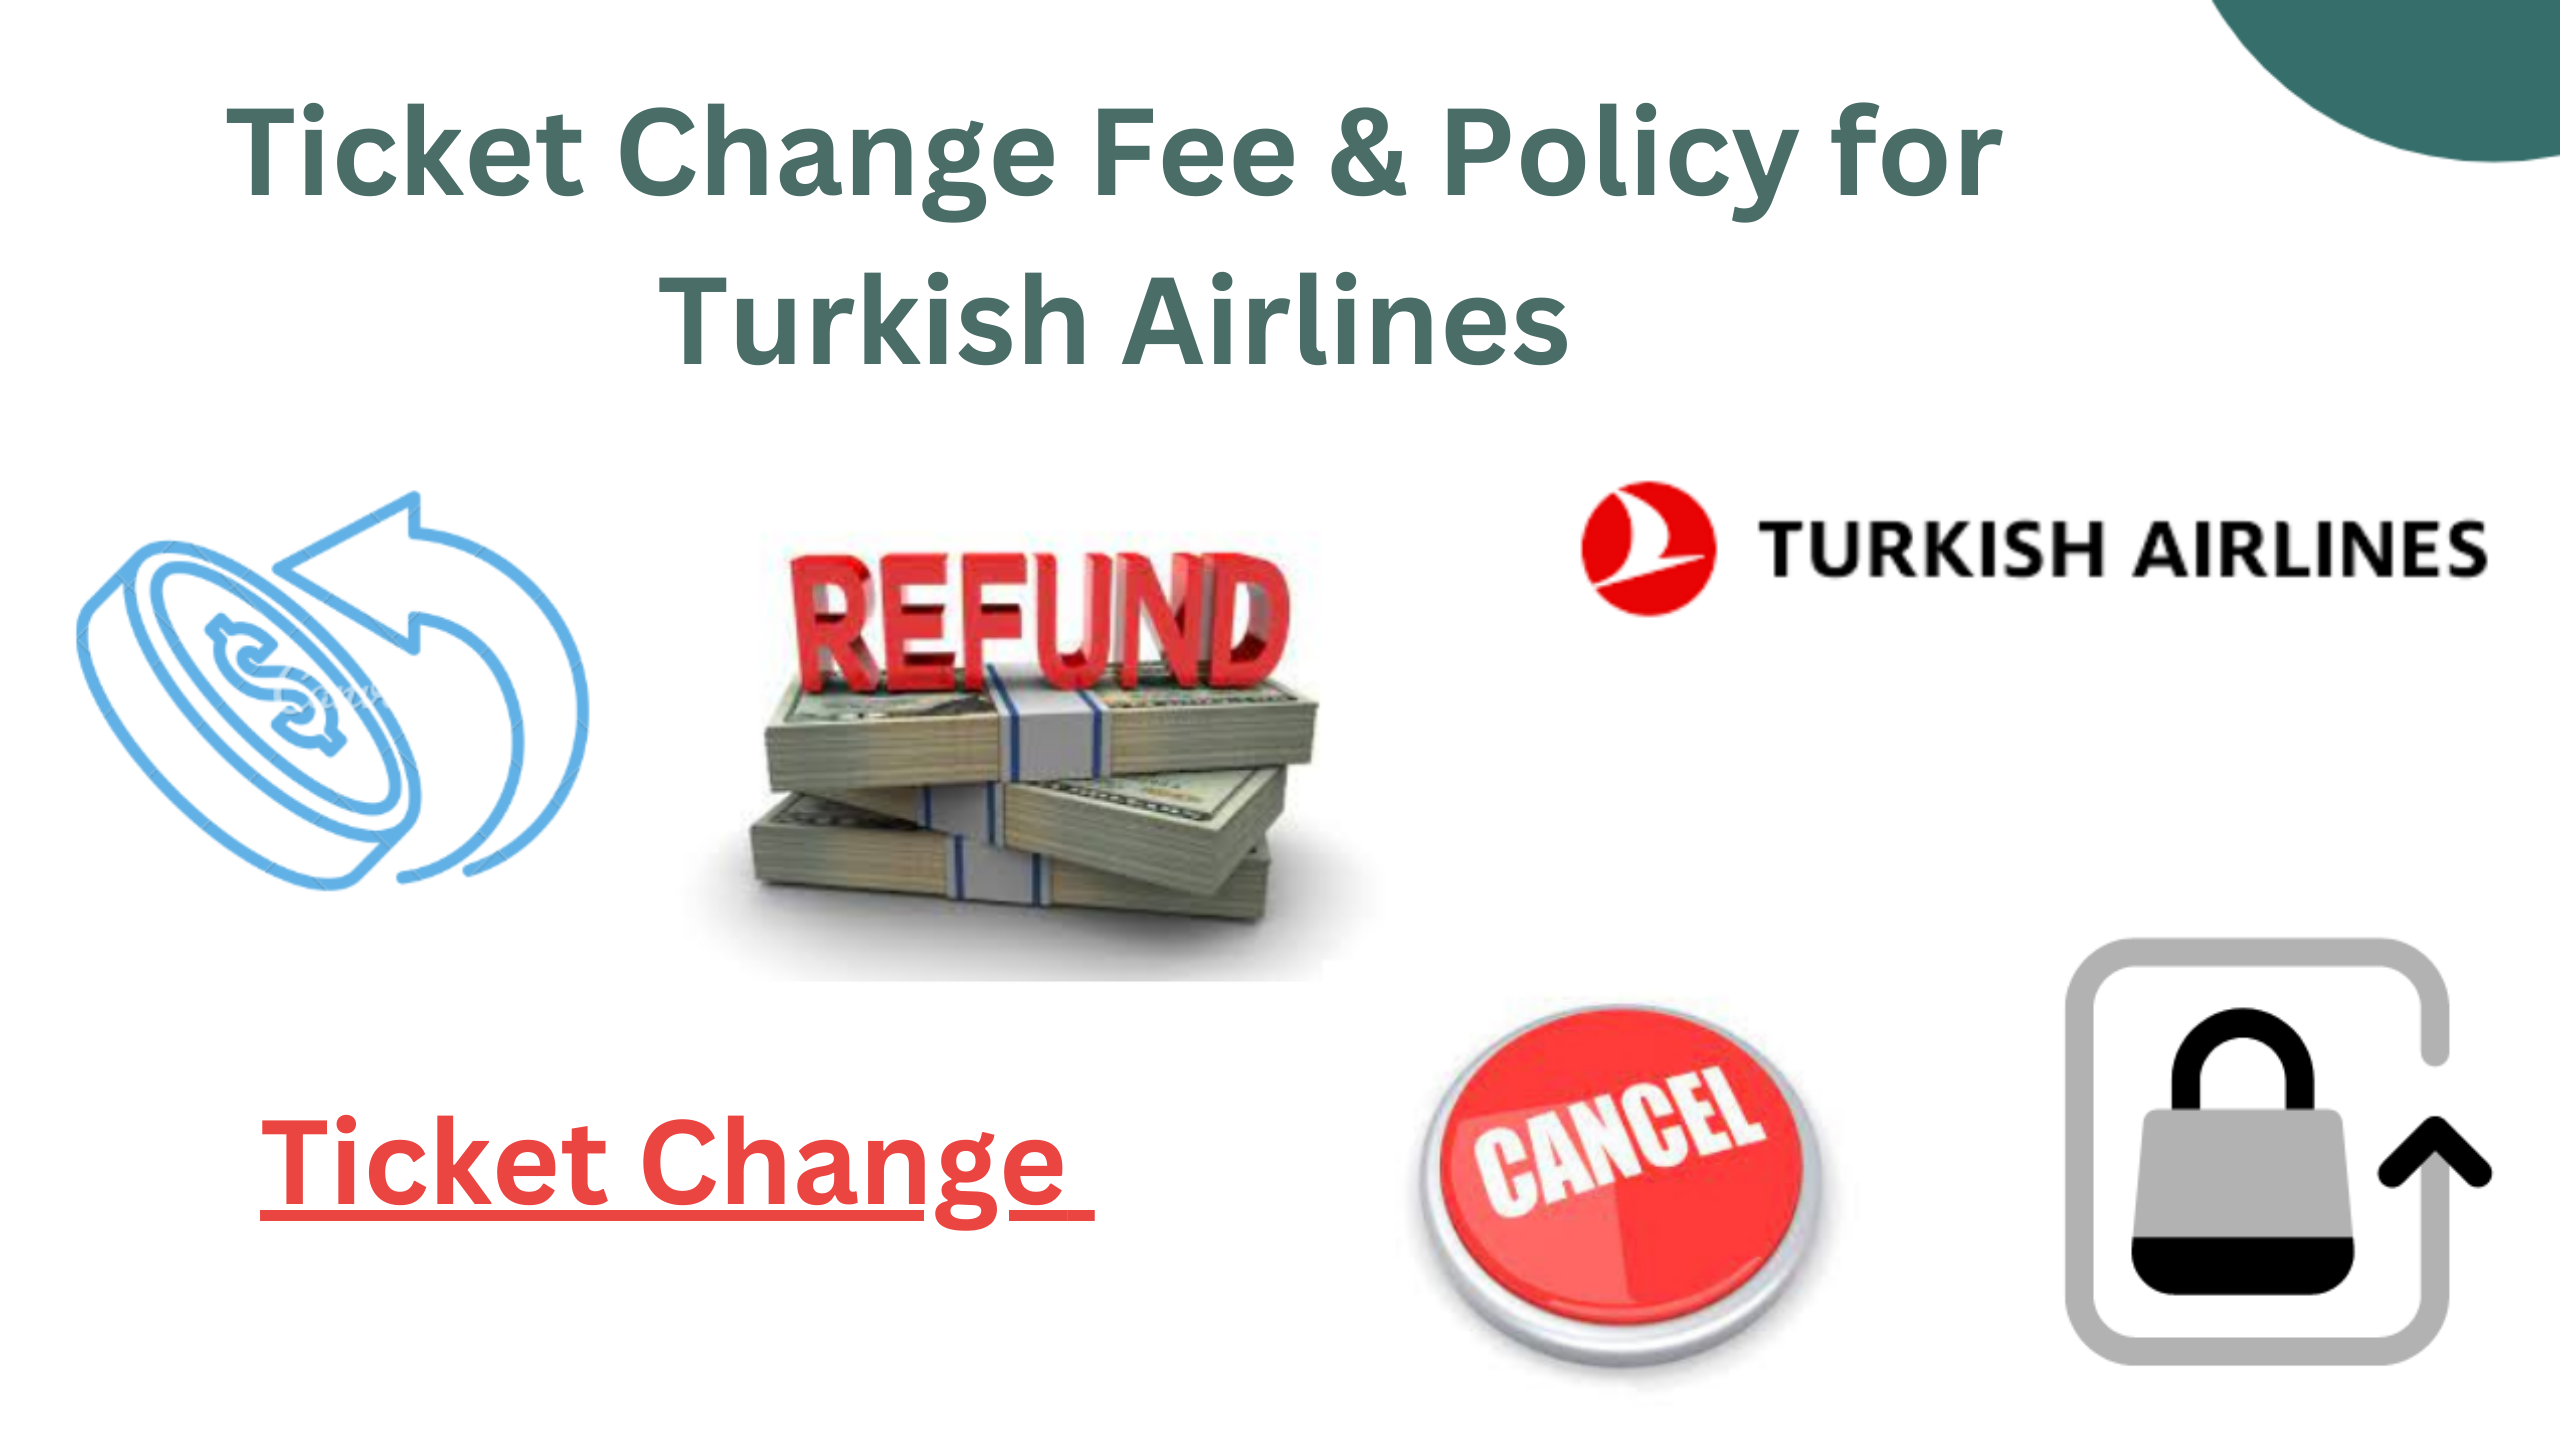 Ticket Change Fee & Policy for Turkish Airlines